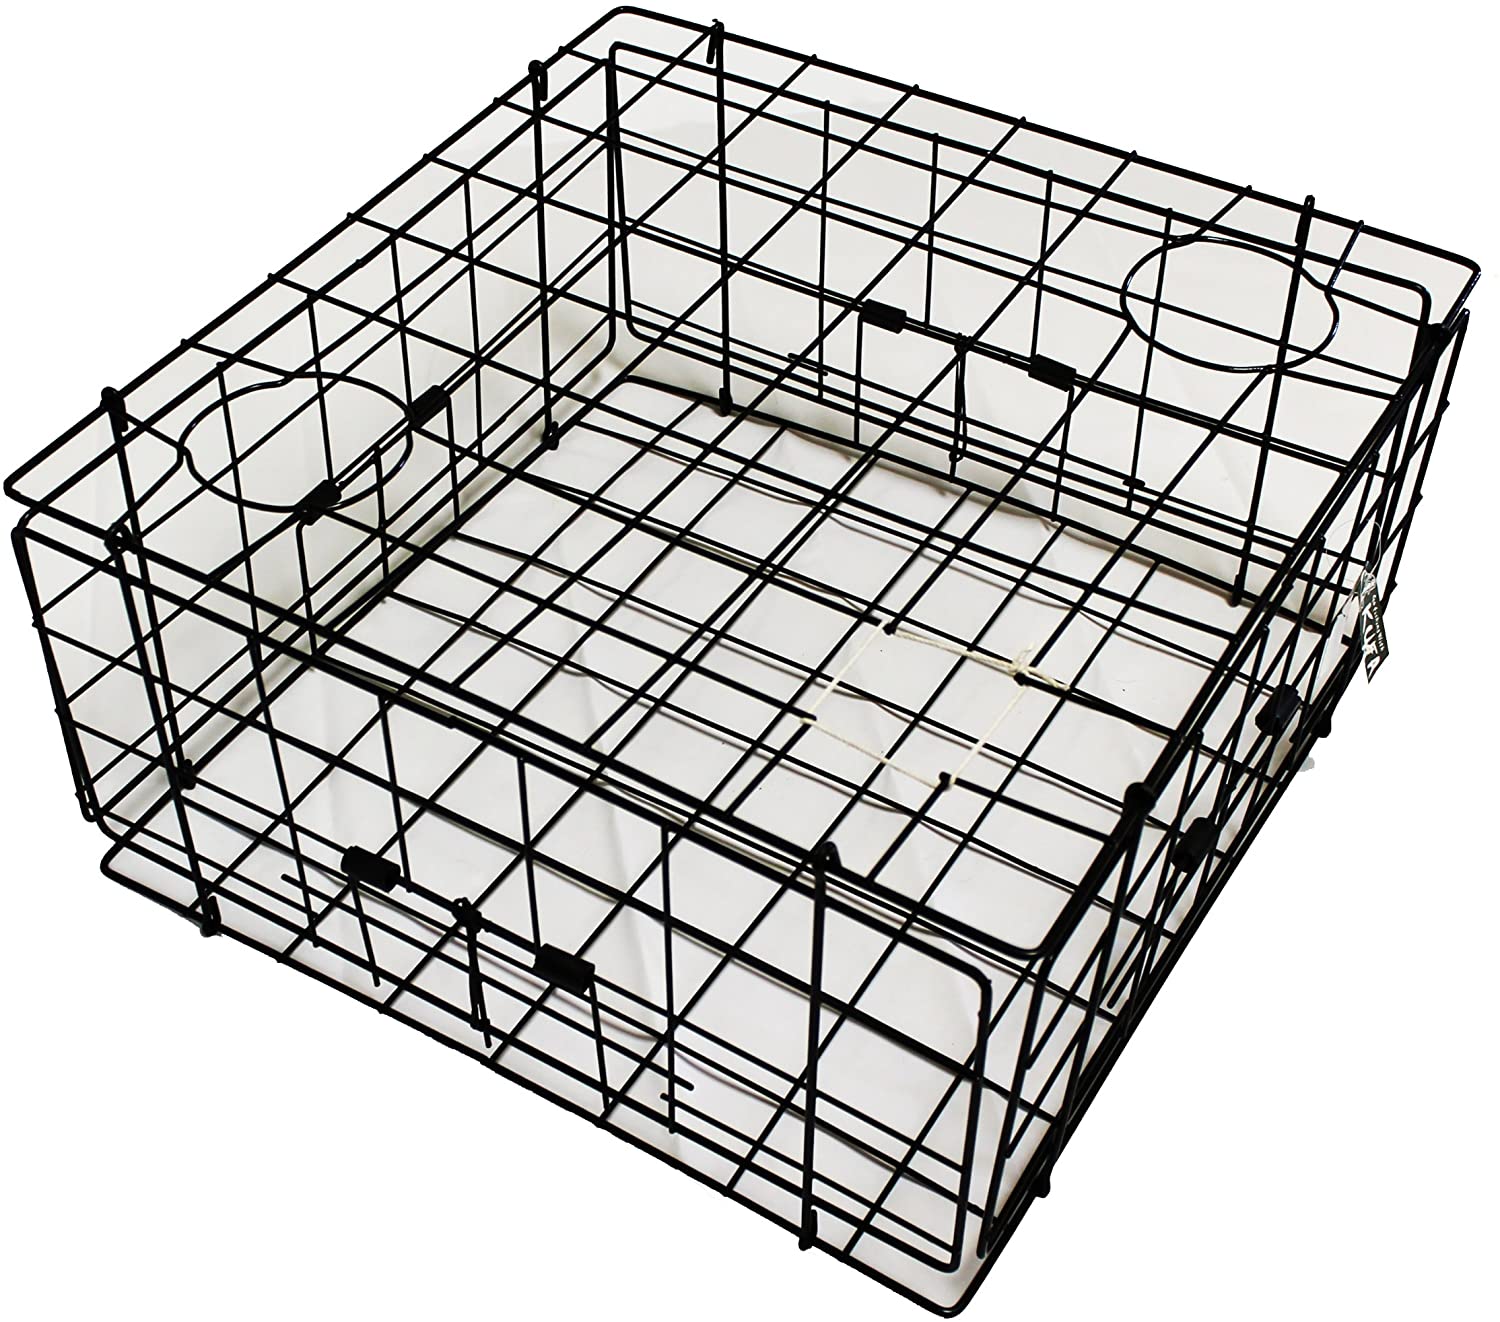 Kufa Vinyl Coated Crab Trap, Crab Trap for Sale